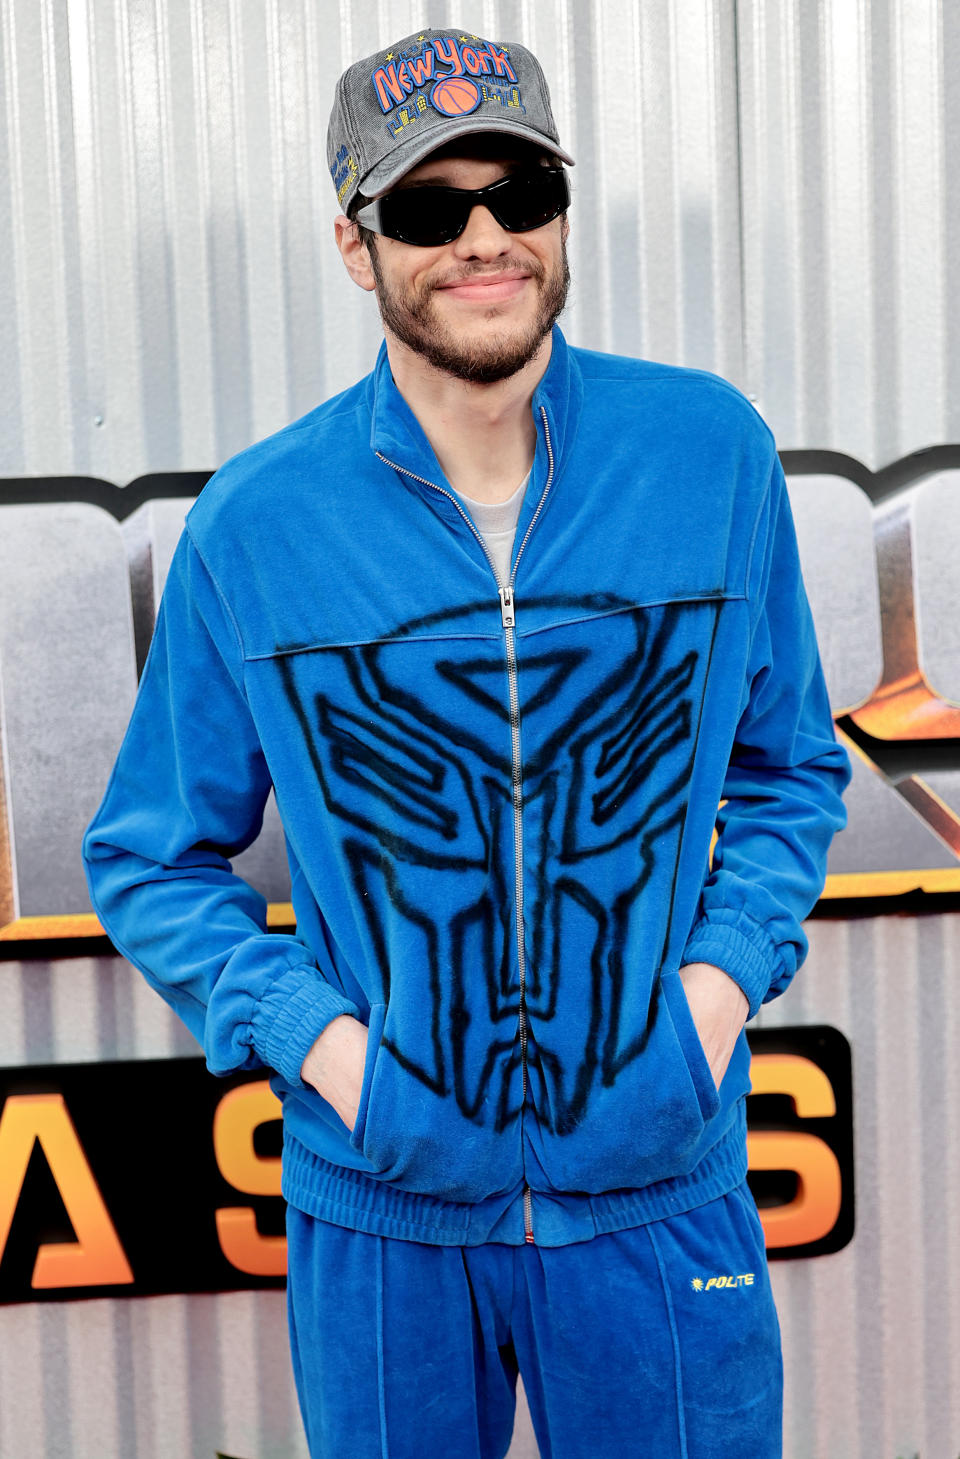 Pete Davidson wearing a blue tracksuit and a cap at a media event, smiling with hands in pockets, standing in front of a metallic background